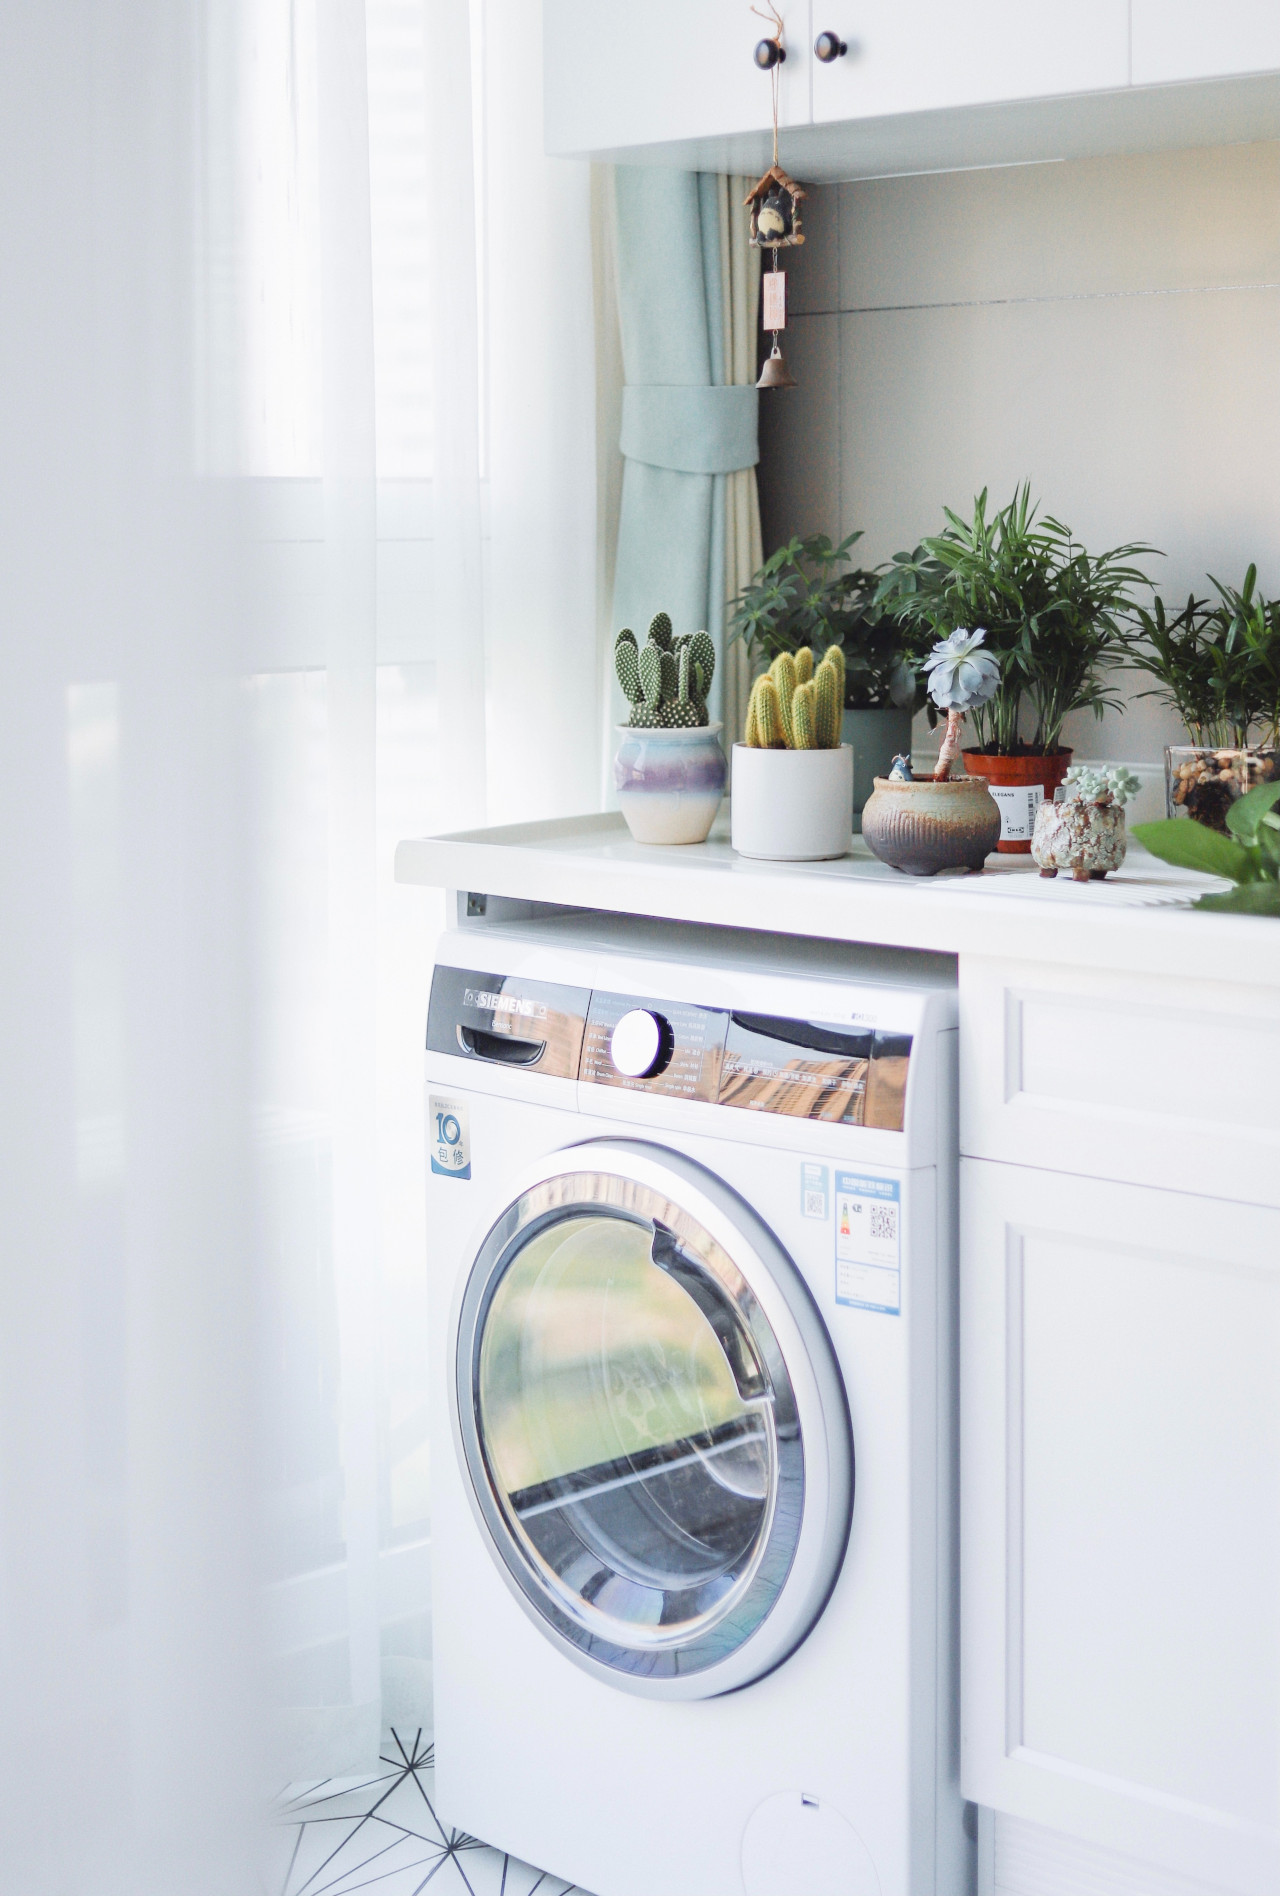 Laundry Room Appliances Used as a Storage Space for Plants 